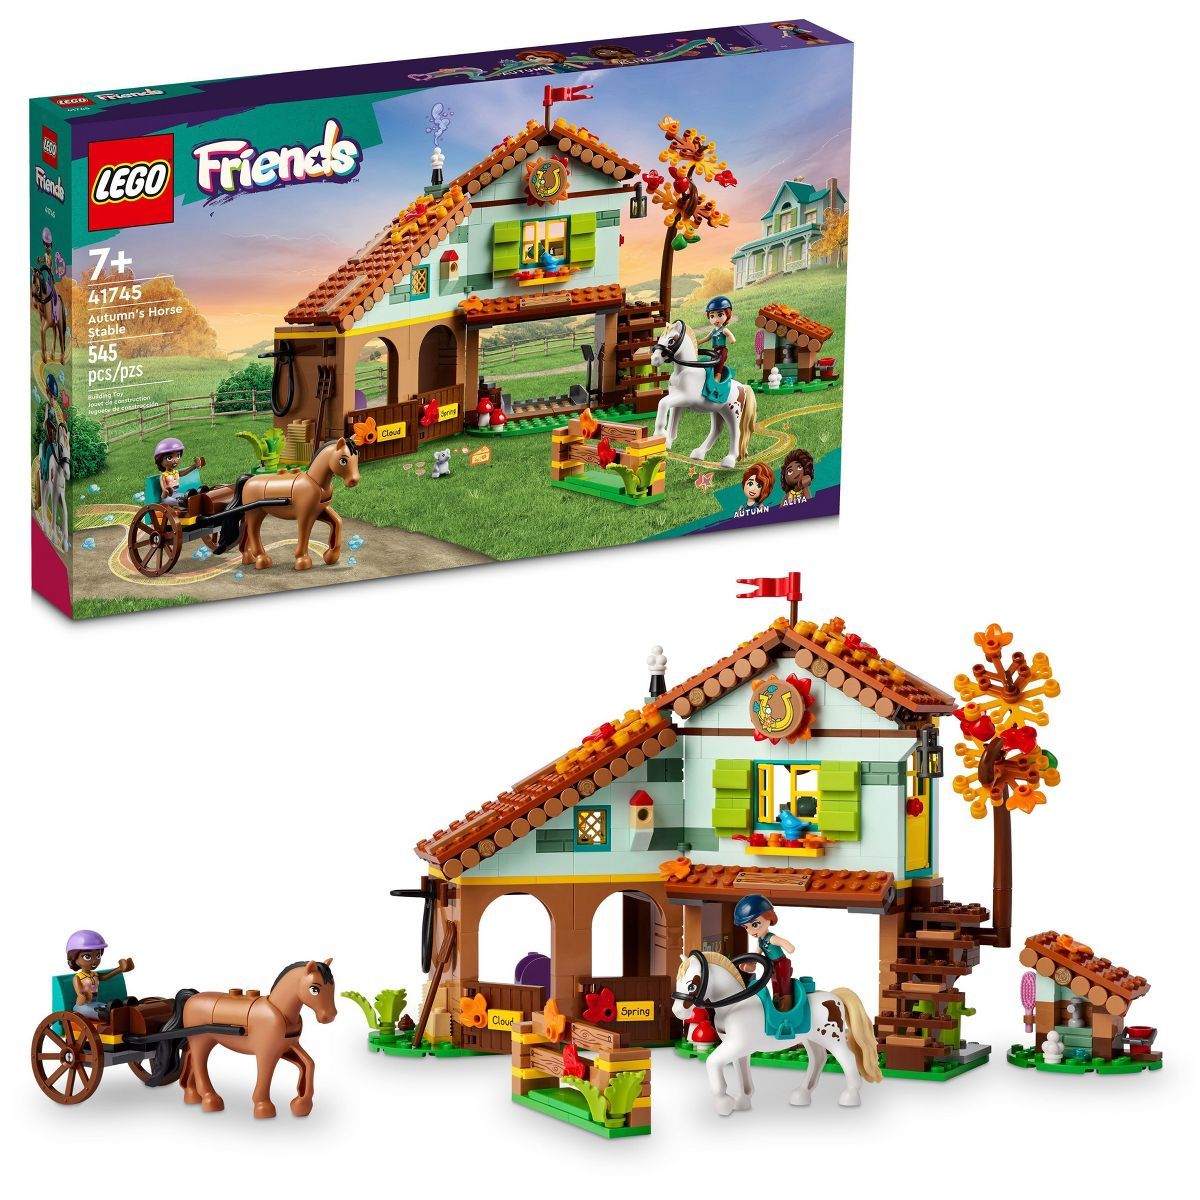 LEGO Friends Autumn's Horse Stable Role Play Building Toy 41745 | Target